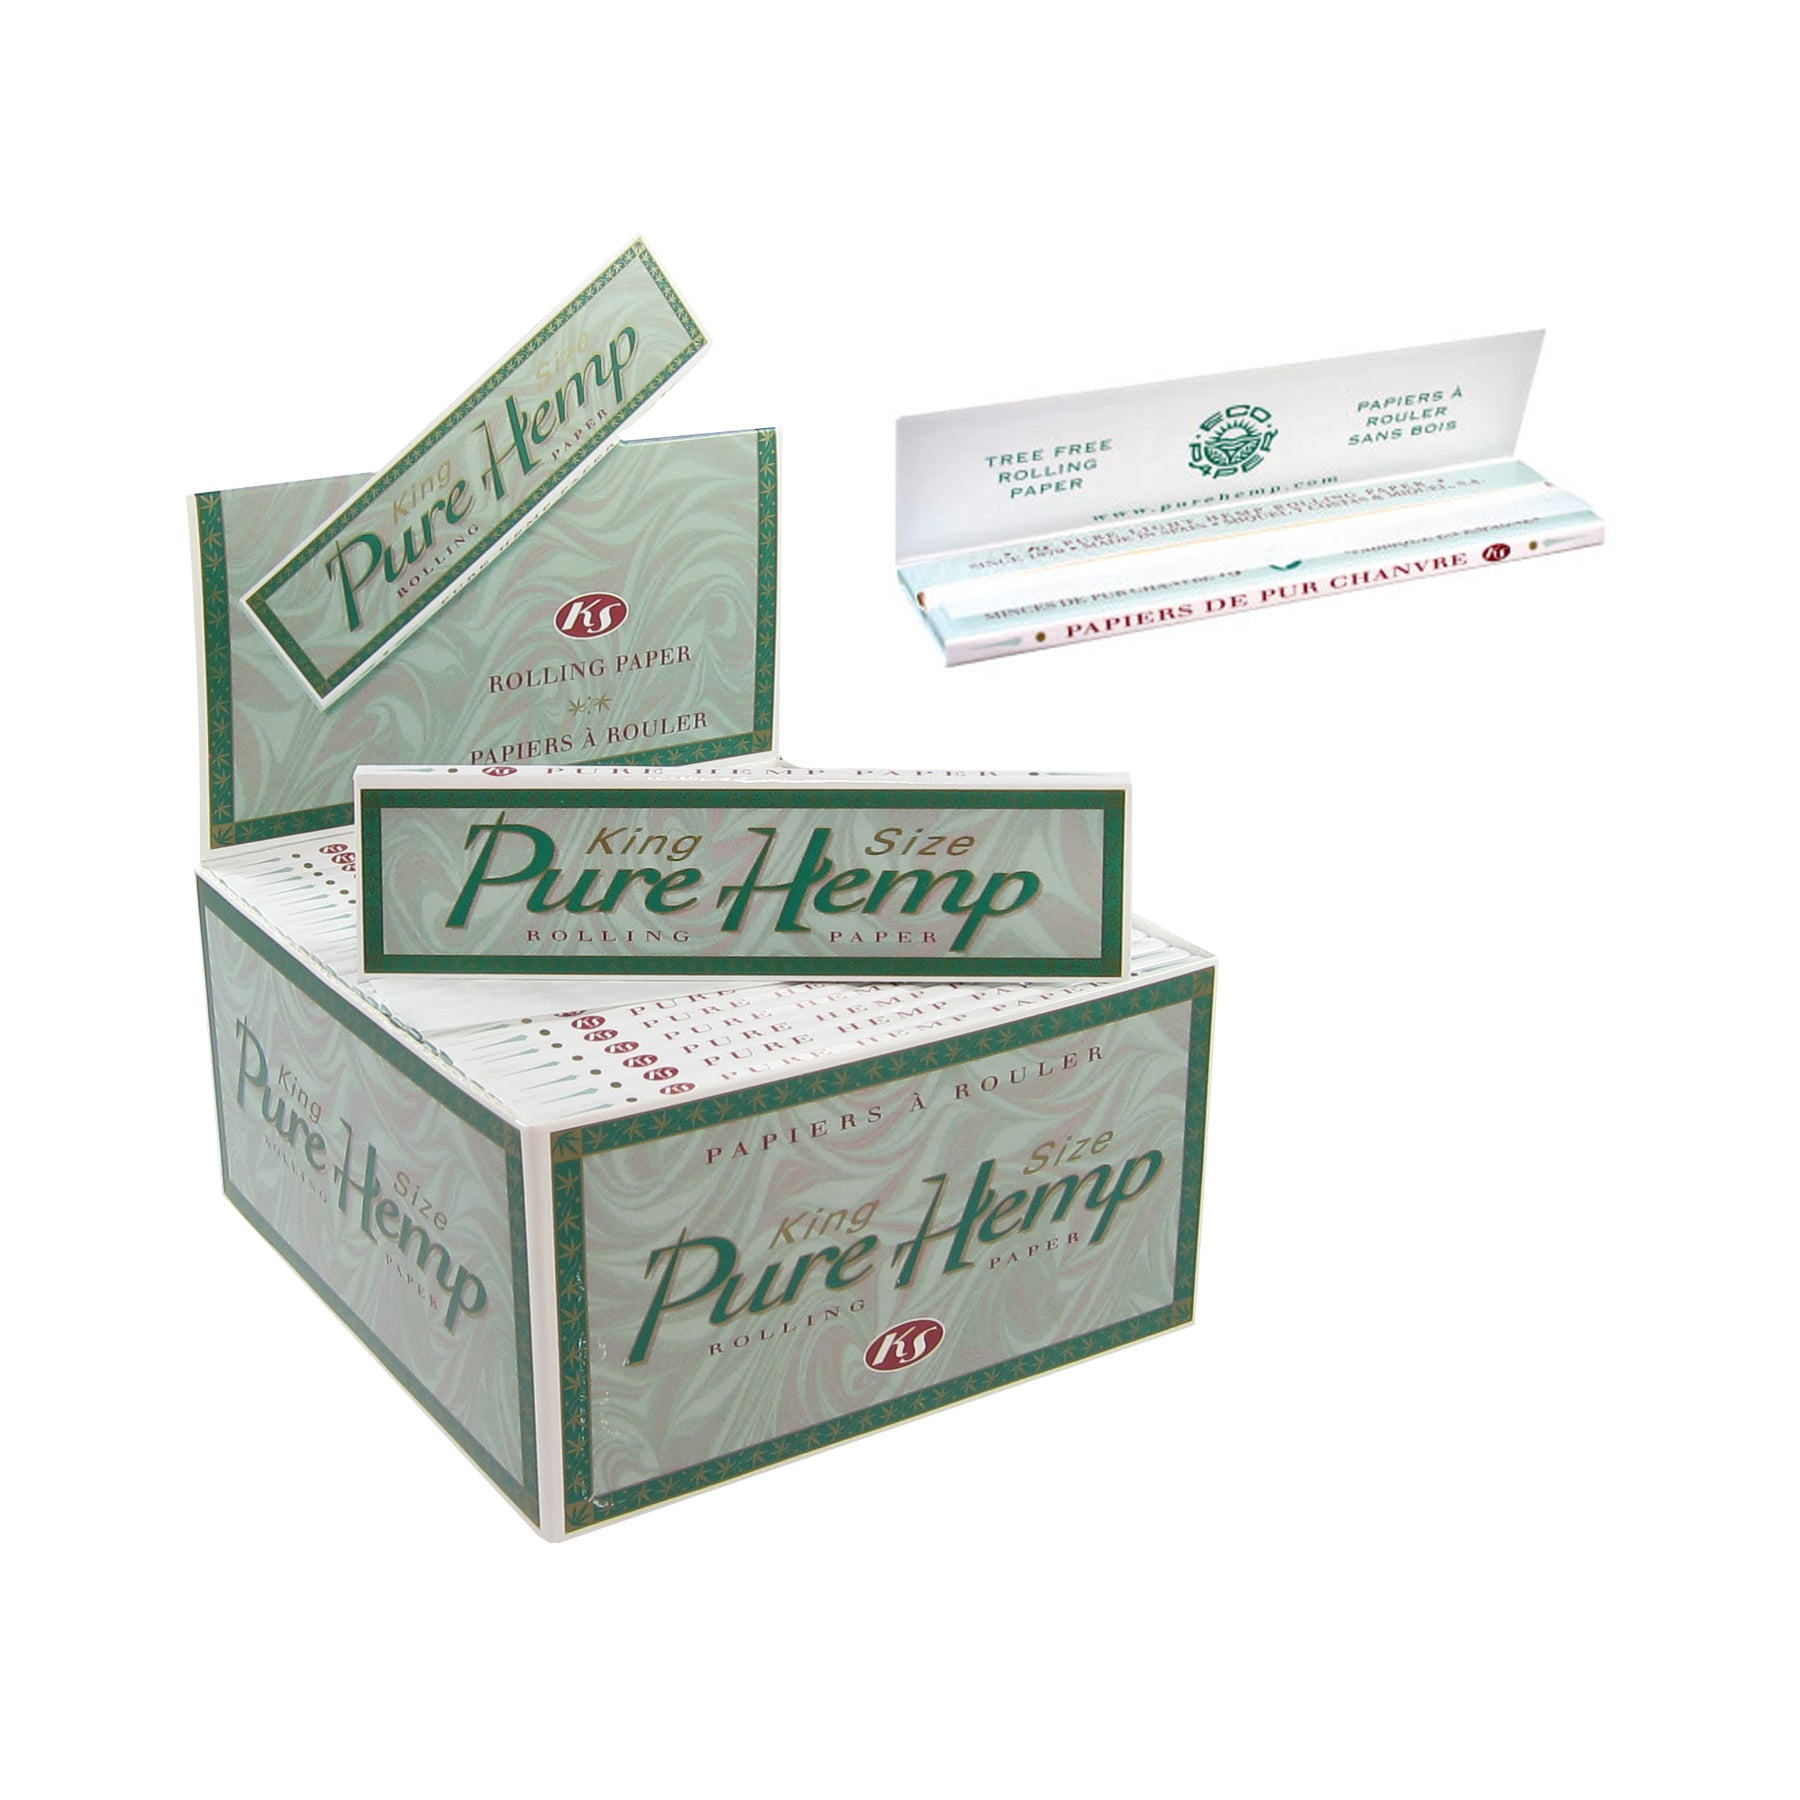 Pure Hemp Classic King Size Rolling Papers Booklet & Box